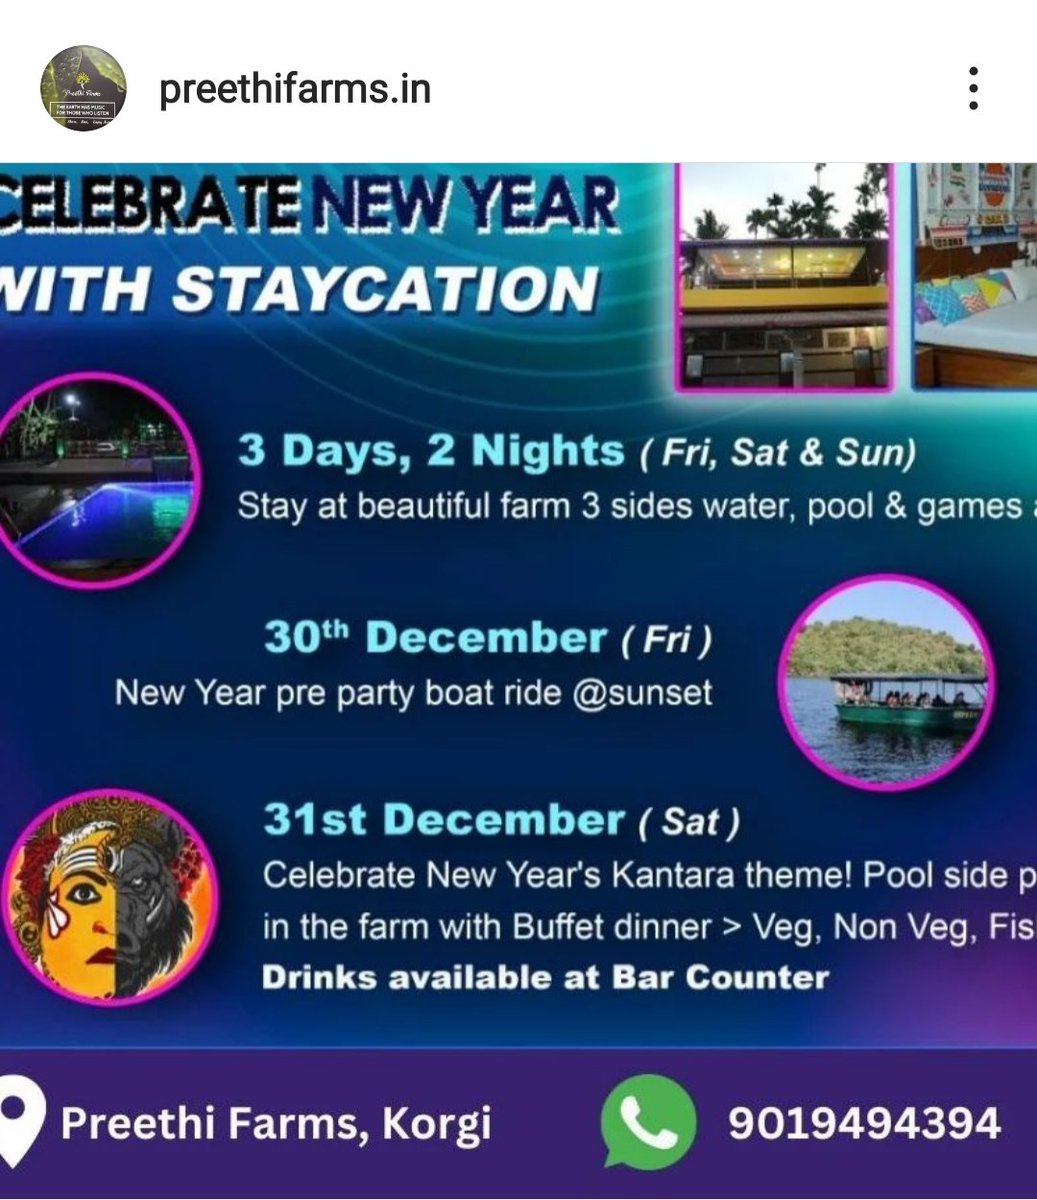 #kantara theme for pool side party and drinks. Hope the bar tenders don't wear our daiva's costume and serve drinks. And ur dj dance kola?.  , #tulu , #tulunad #daivakola #bootharadane. Wtf s happening